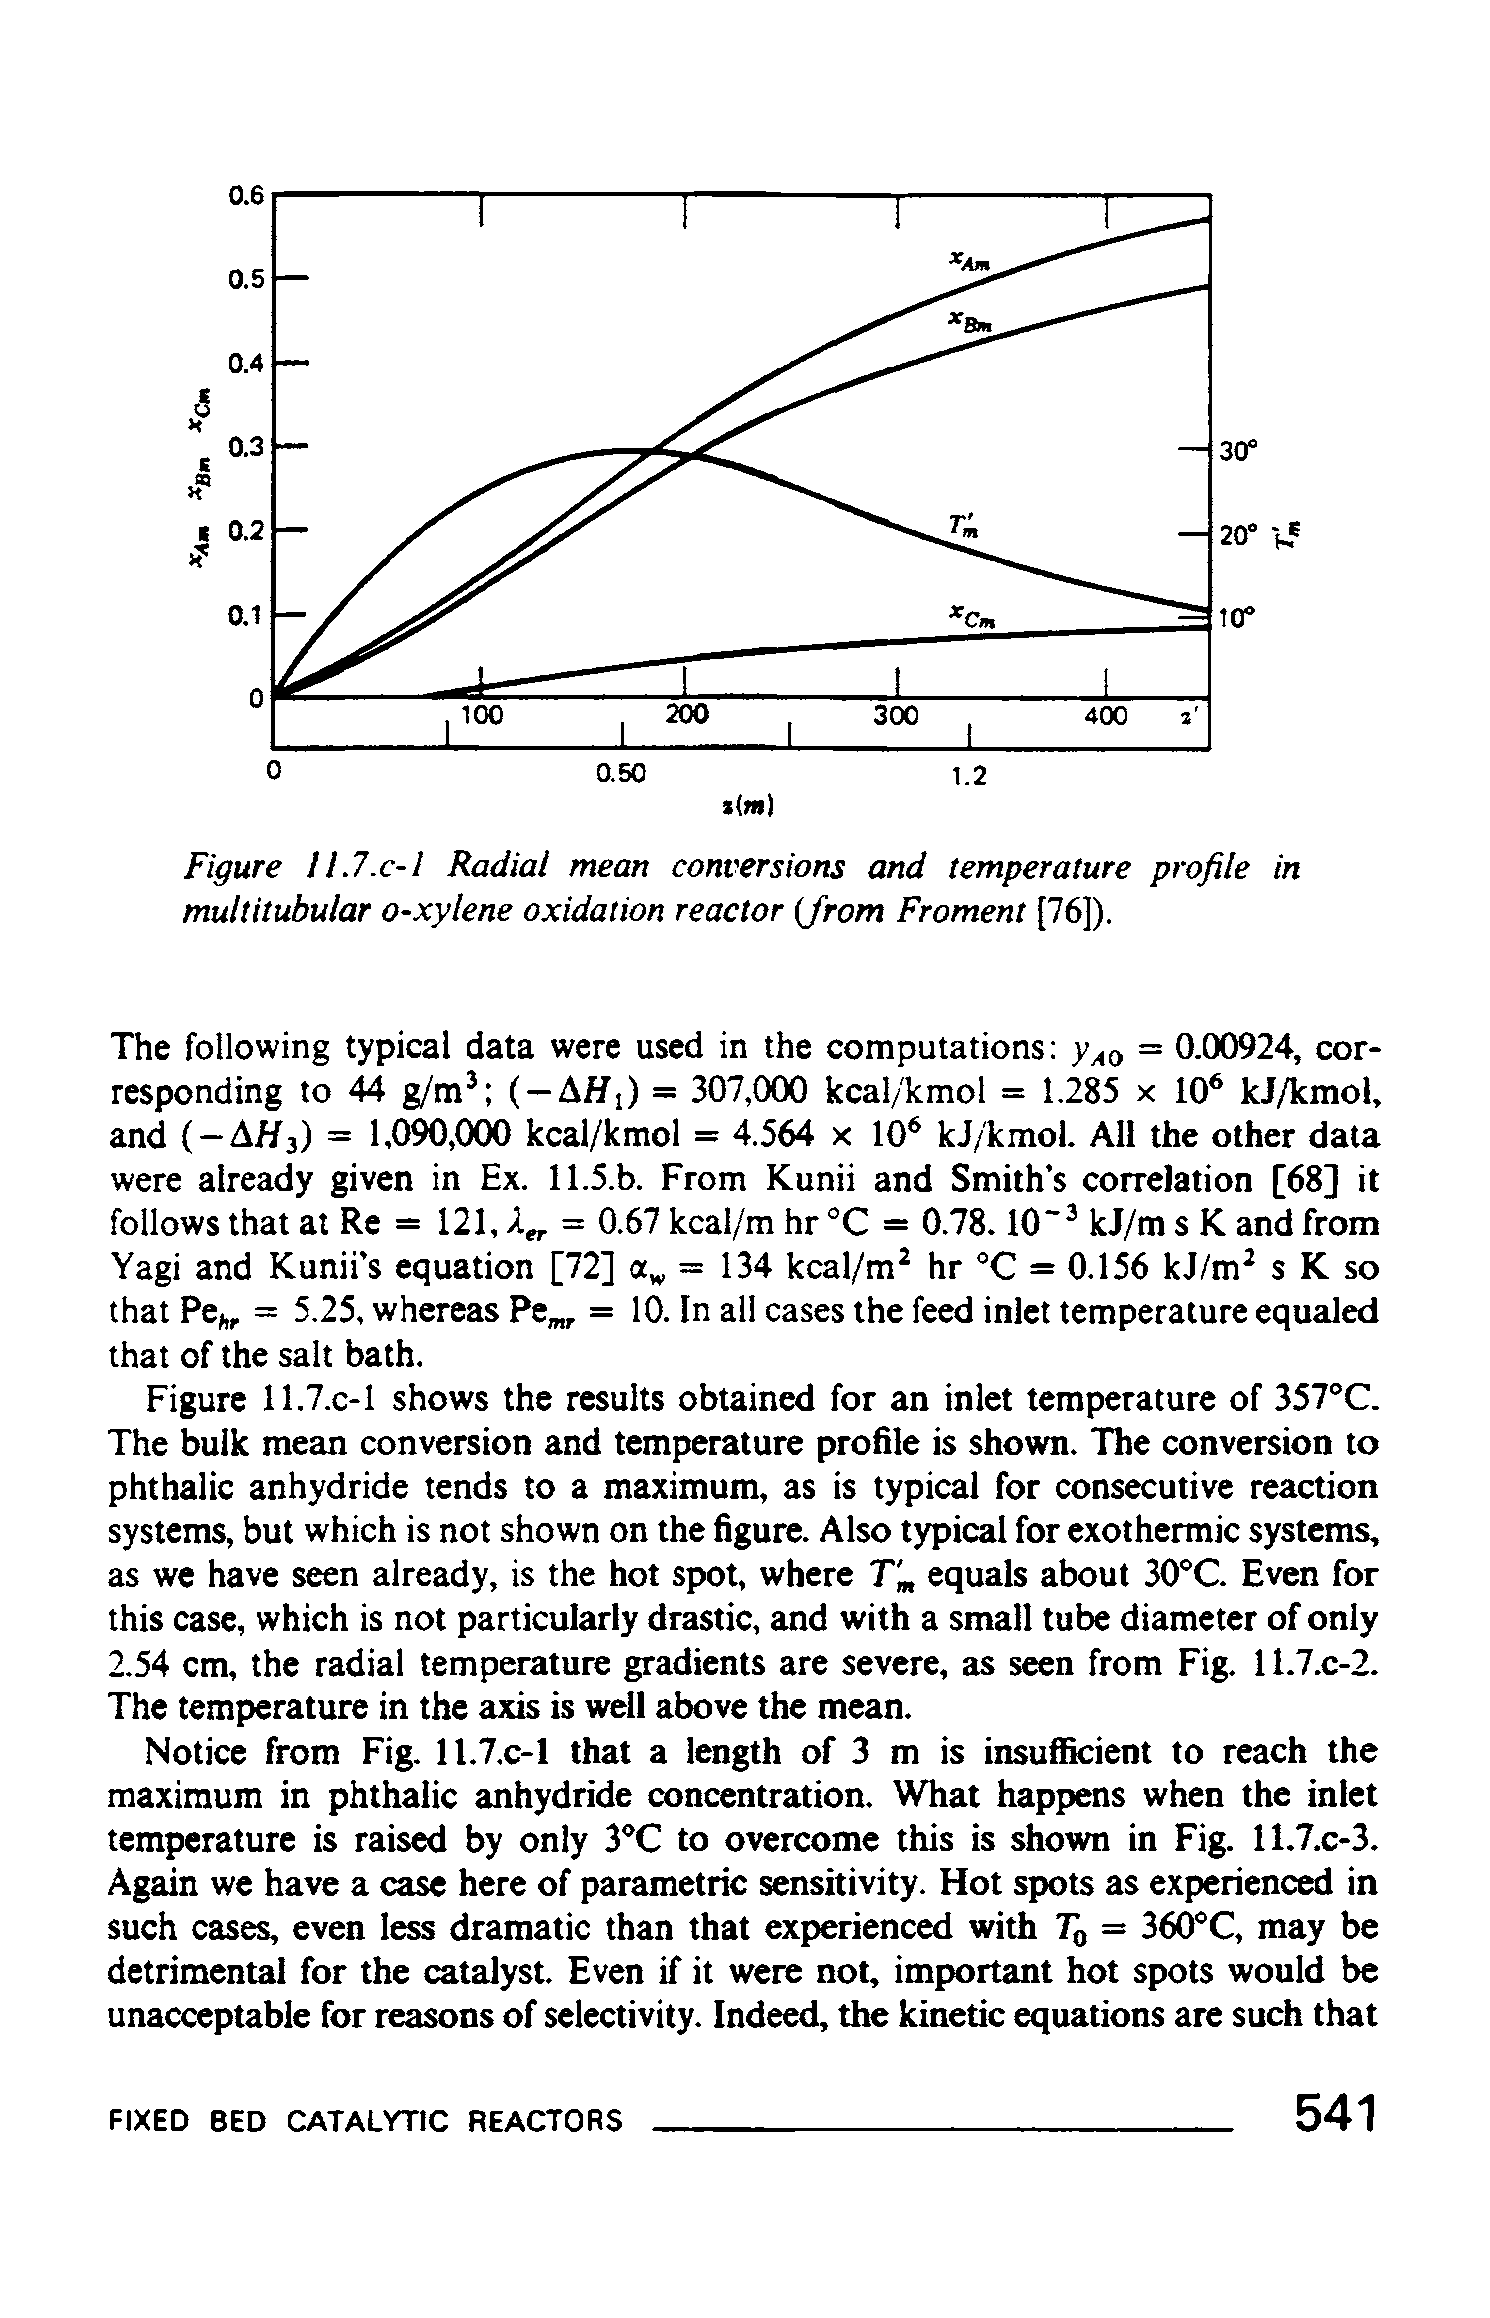 Figure 11.7.C-1 shows the results obtained for an inlet temperature of 357°C. The bulk mean conversion and temperature profile is shown. The conversion to phthalic anhydride tends to a maximum, as is typical for consecutive reaction systems, but which is not shown on the figure. Also typical for exothermic systems, as we have seen already, is the hot spot, where T equals about 30 C Even for this case, which is not particularly drastic, and with a small tube diameter of only 2.54 cm, the radial temperature gradients are severe, as seen from Fig. 11.7.C-2. The temperature in the axis is well above the mean.